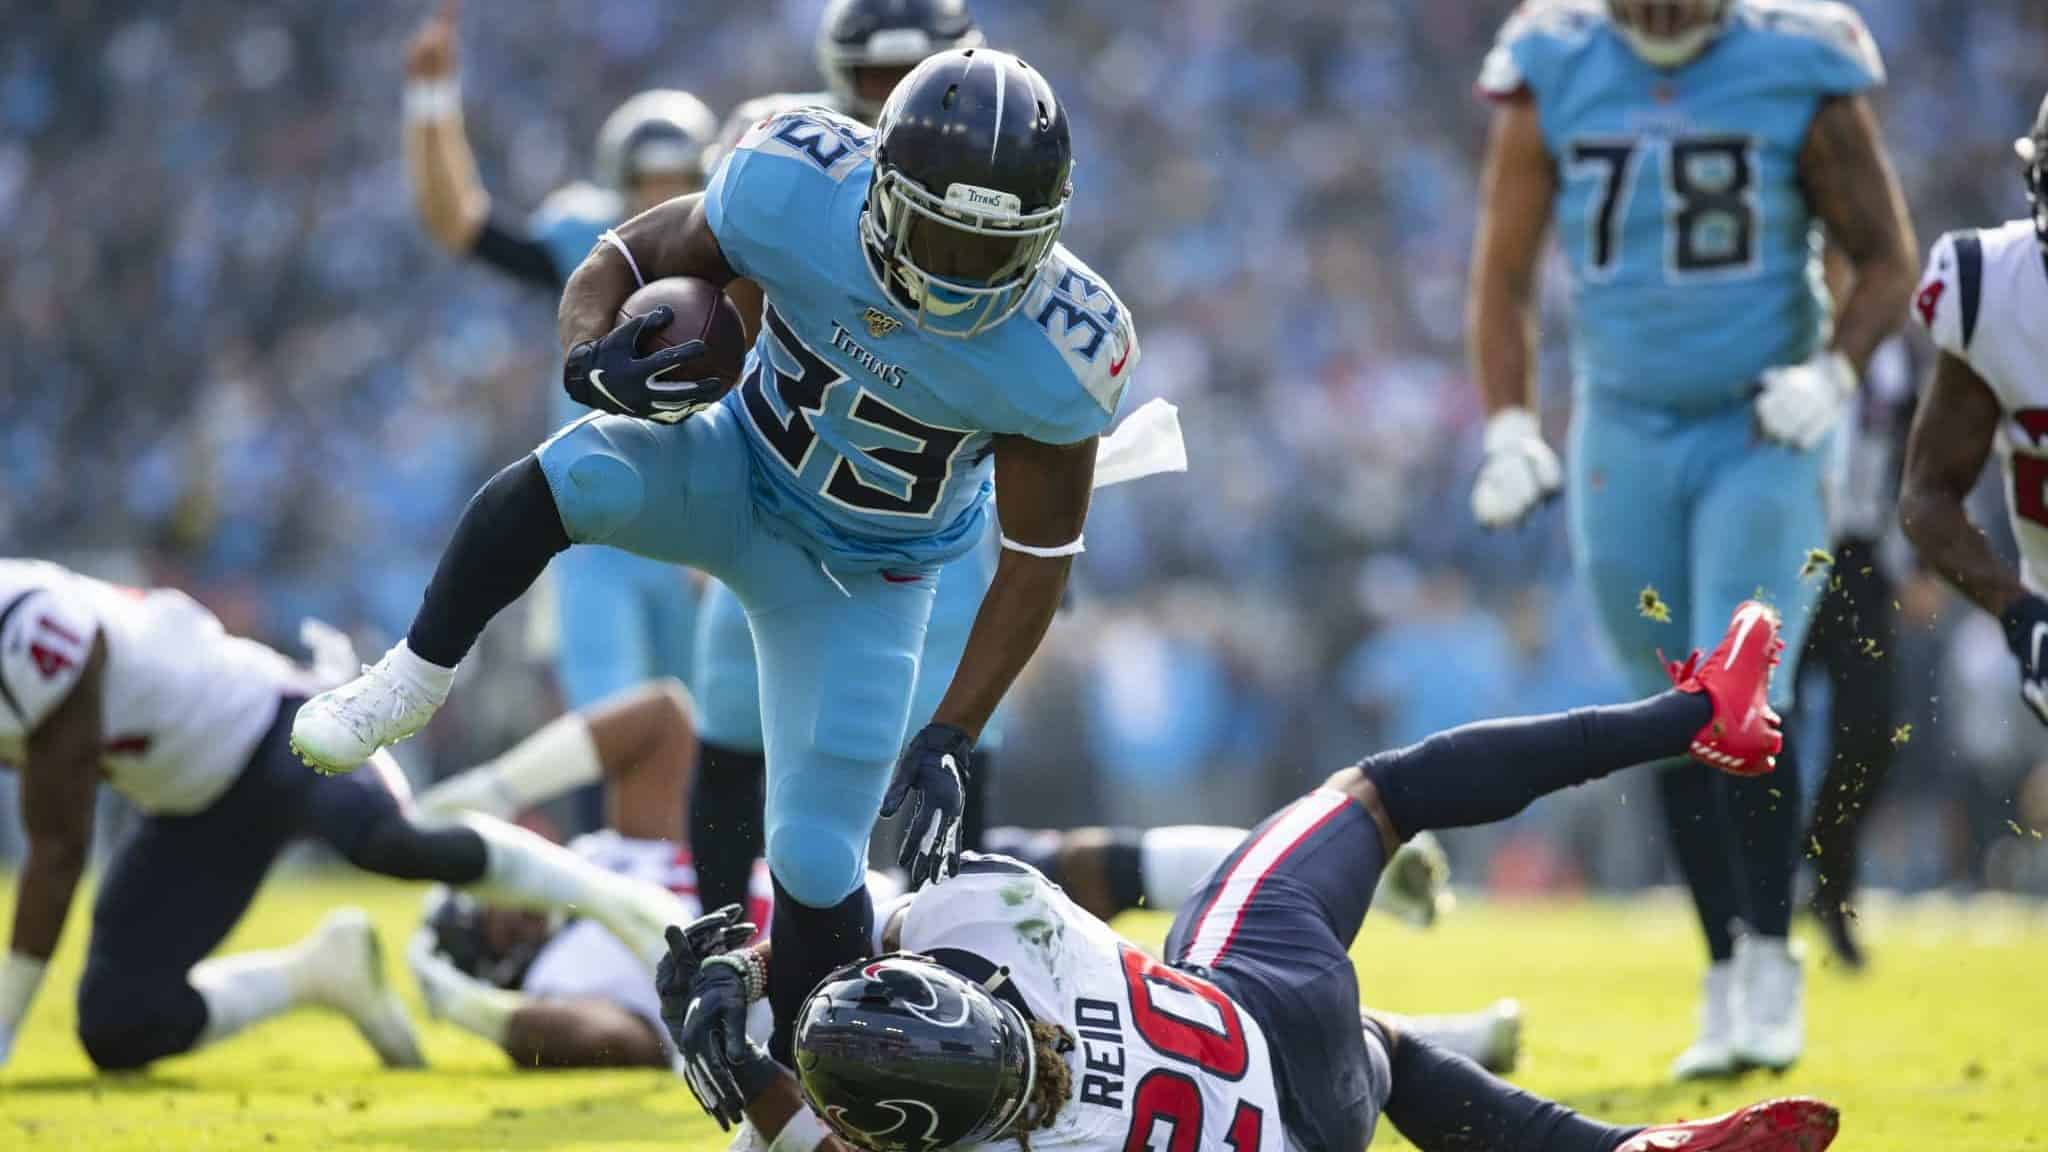 NASHVILLE, TN - DECEMBER 15: Justin Reid #20 of the Houston Texans trips up Dion Lewis #33 of the Tennessee Titans as he carries the ball in the red zone during the second quarter at Nissan Stadium on December 15, 2019 in Nashville, Tennessee.